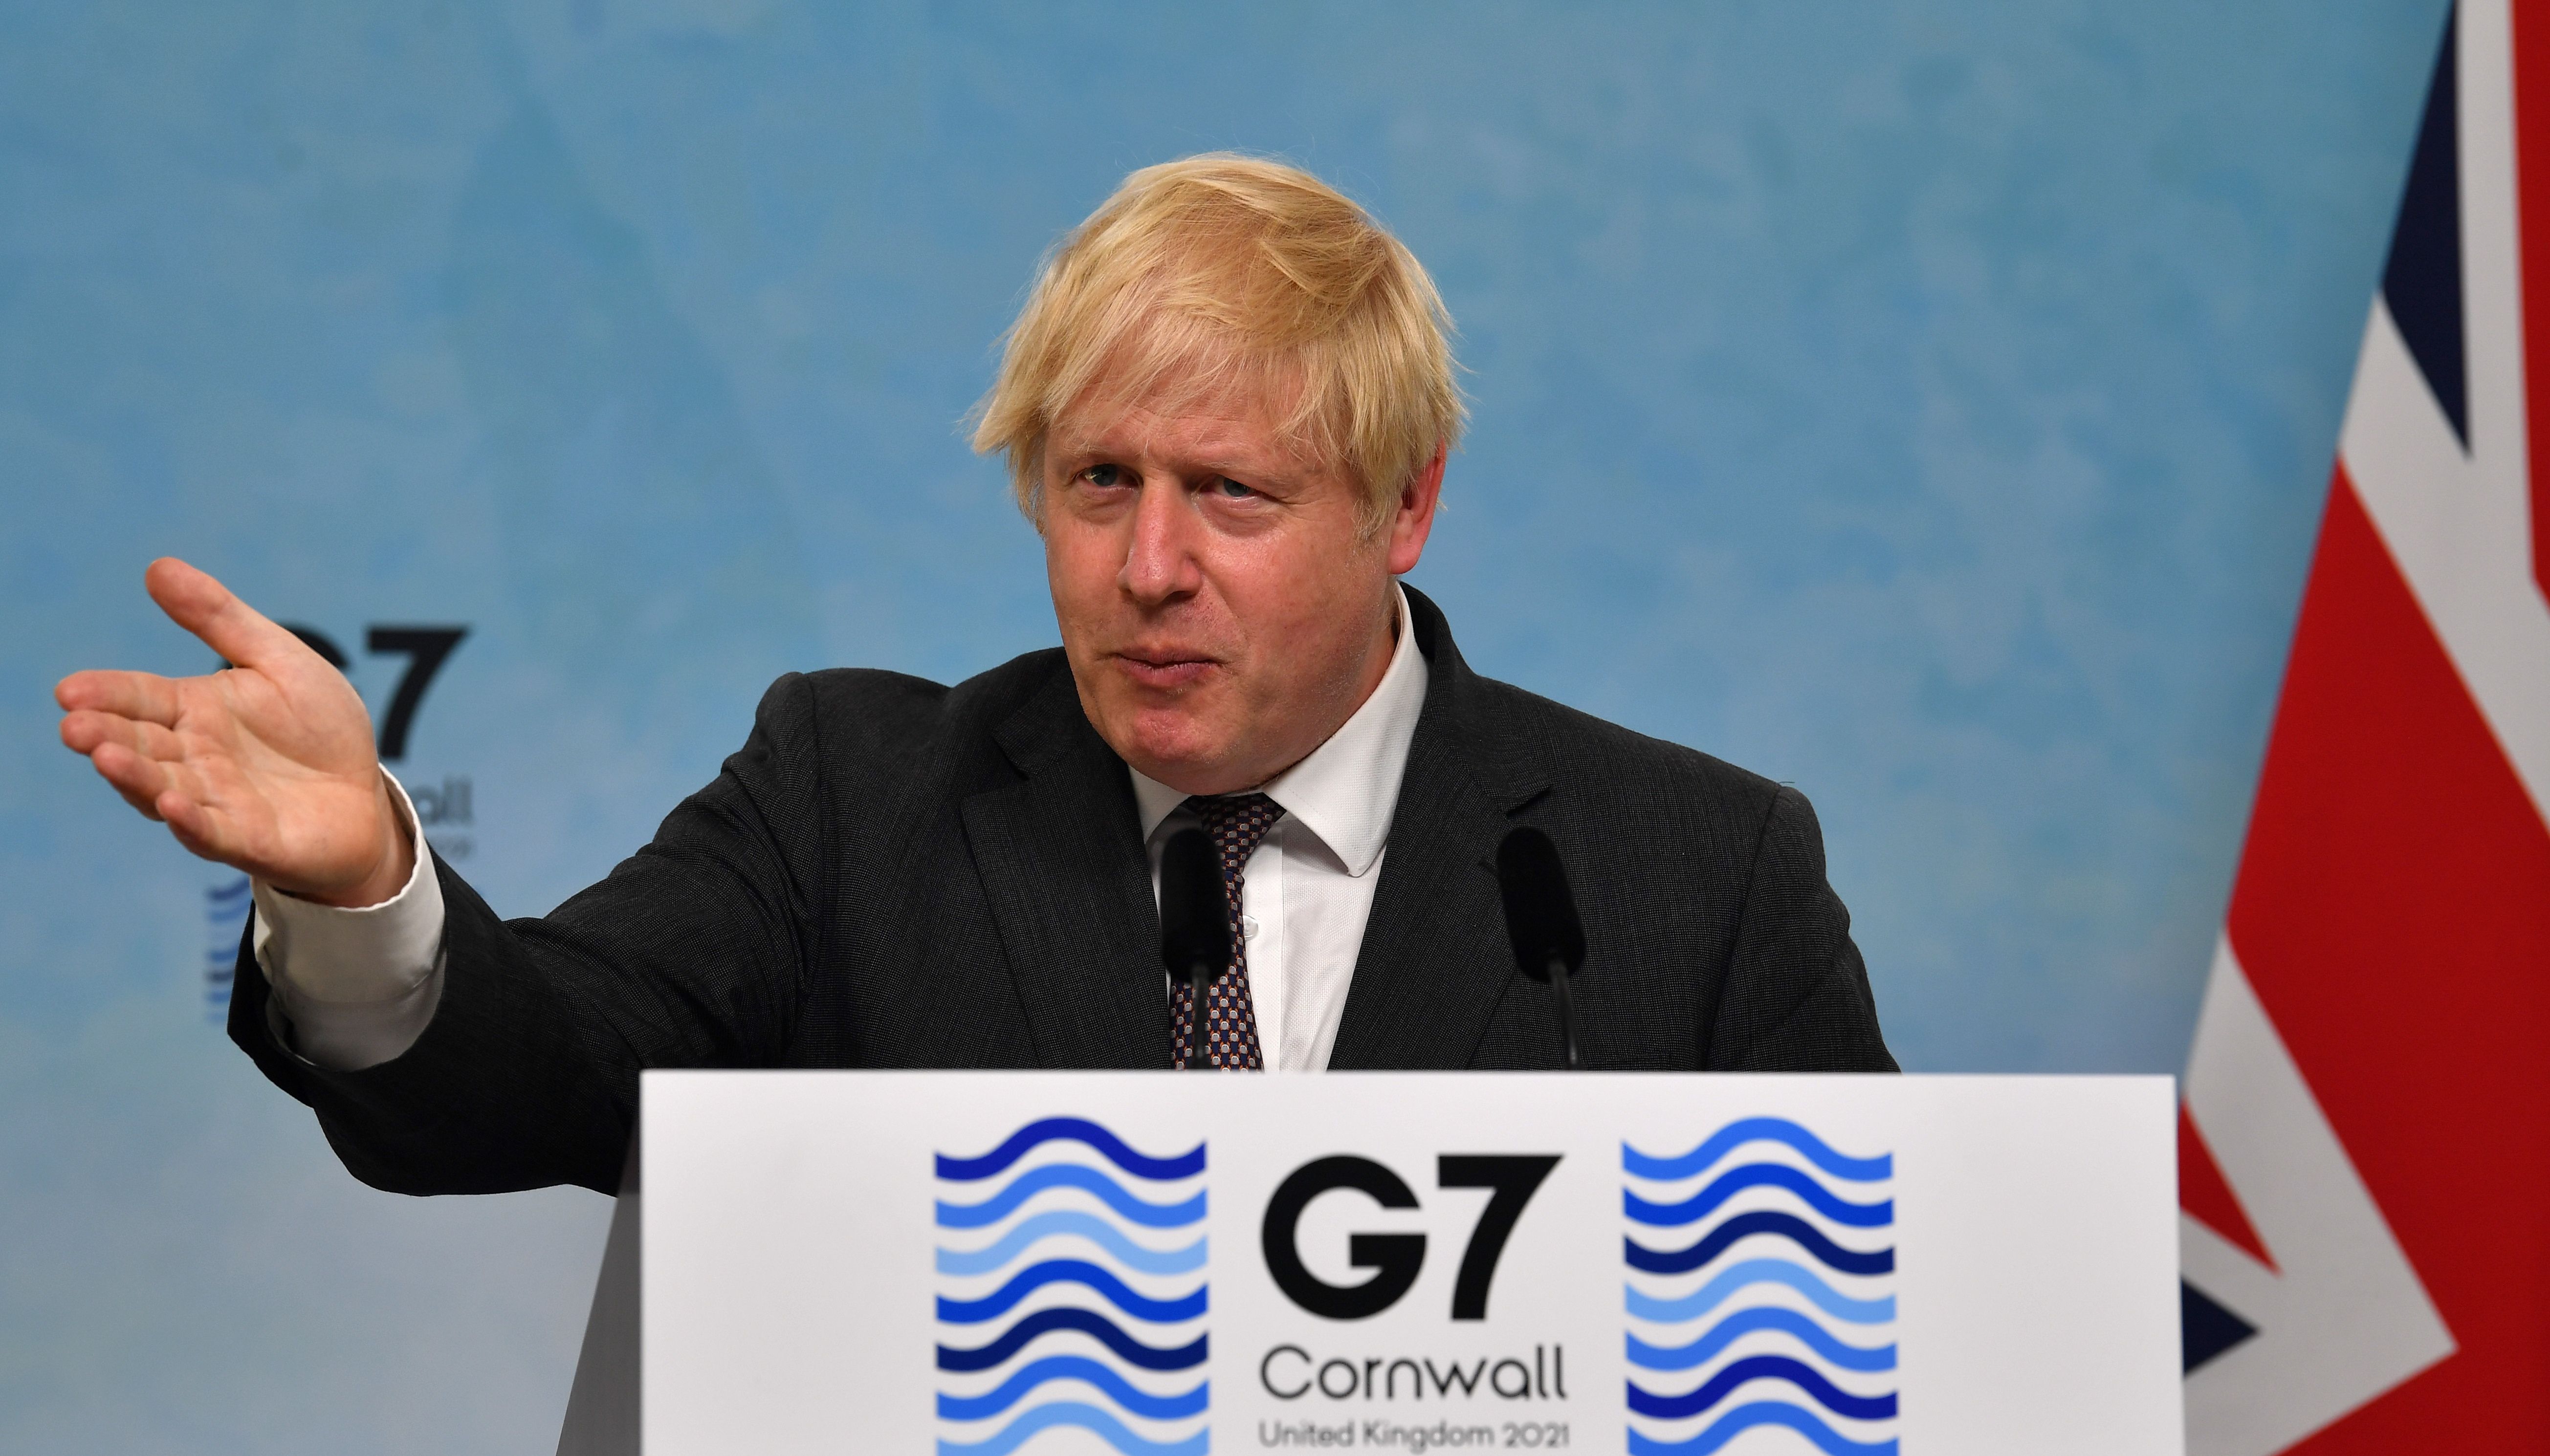 Prime Minister Boris Johnson during a press conference on the final day of the G7 summit in Cornwall.